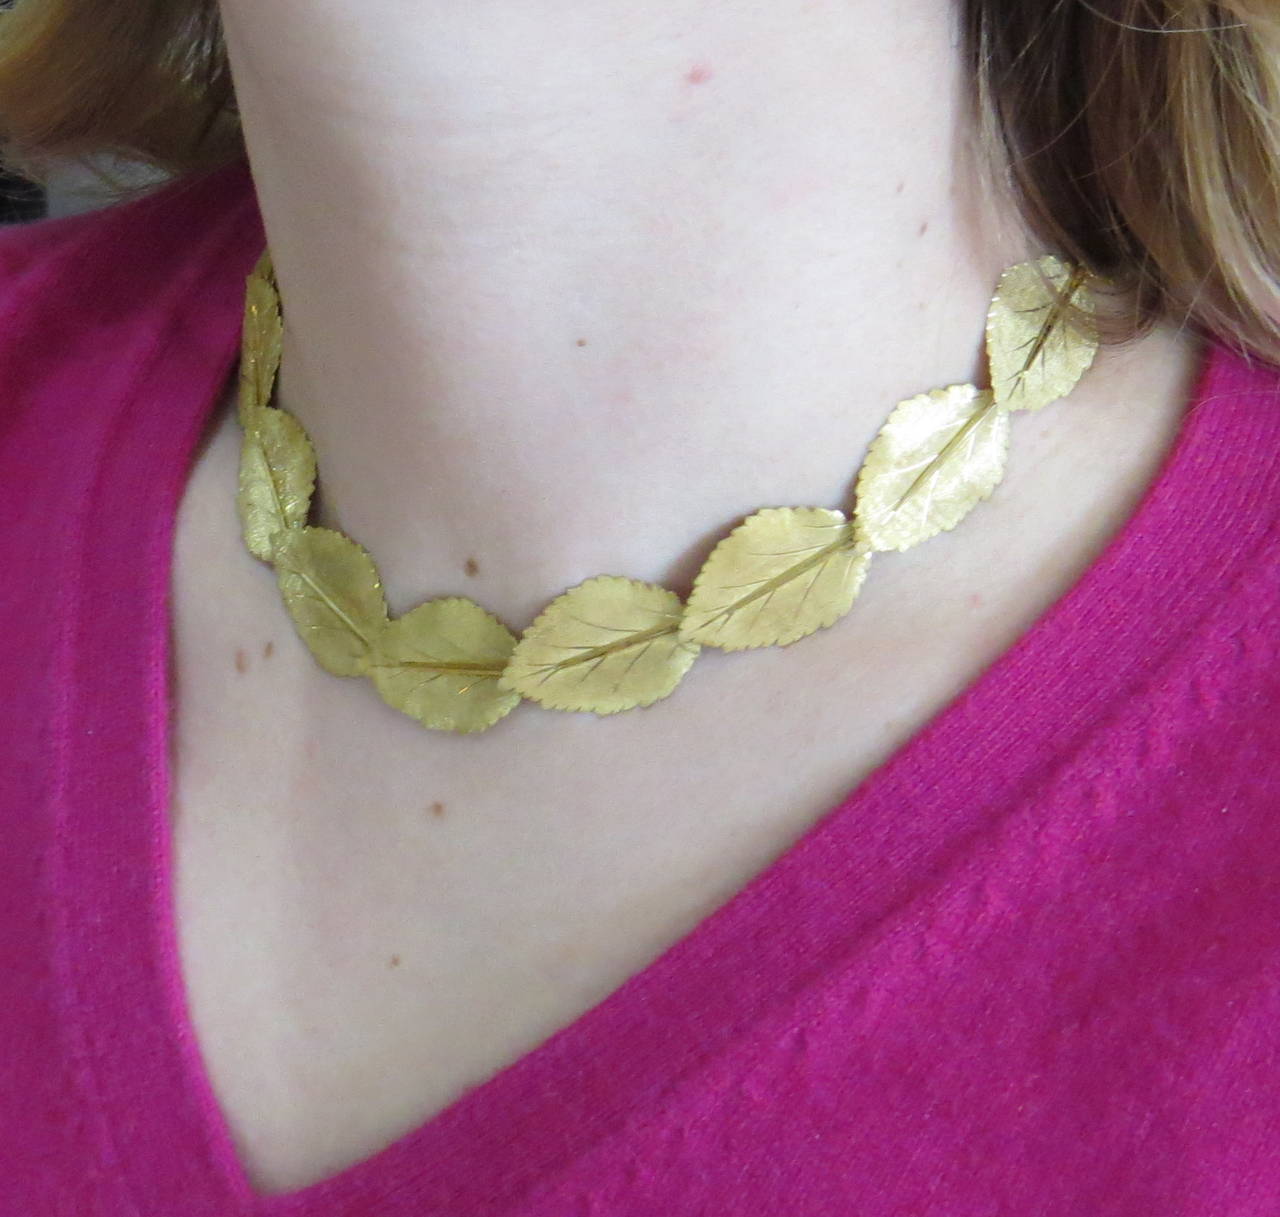 18k gold necklace by Buccellati, featuring leaf motifs. Necklace is 16